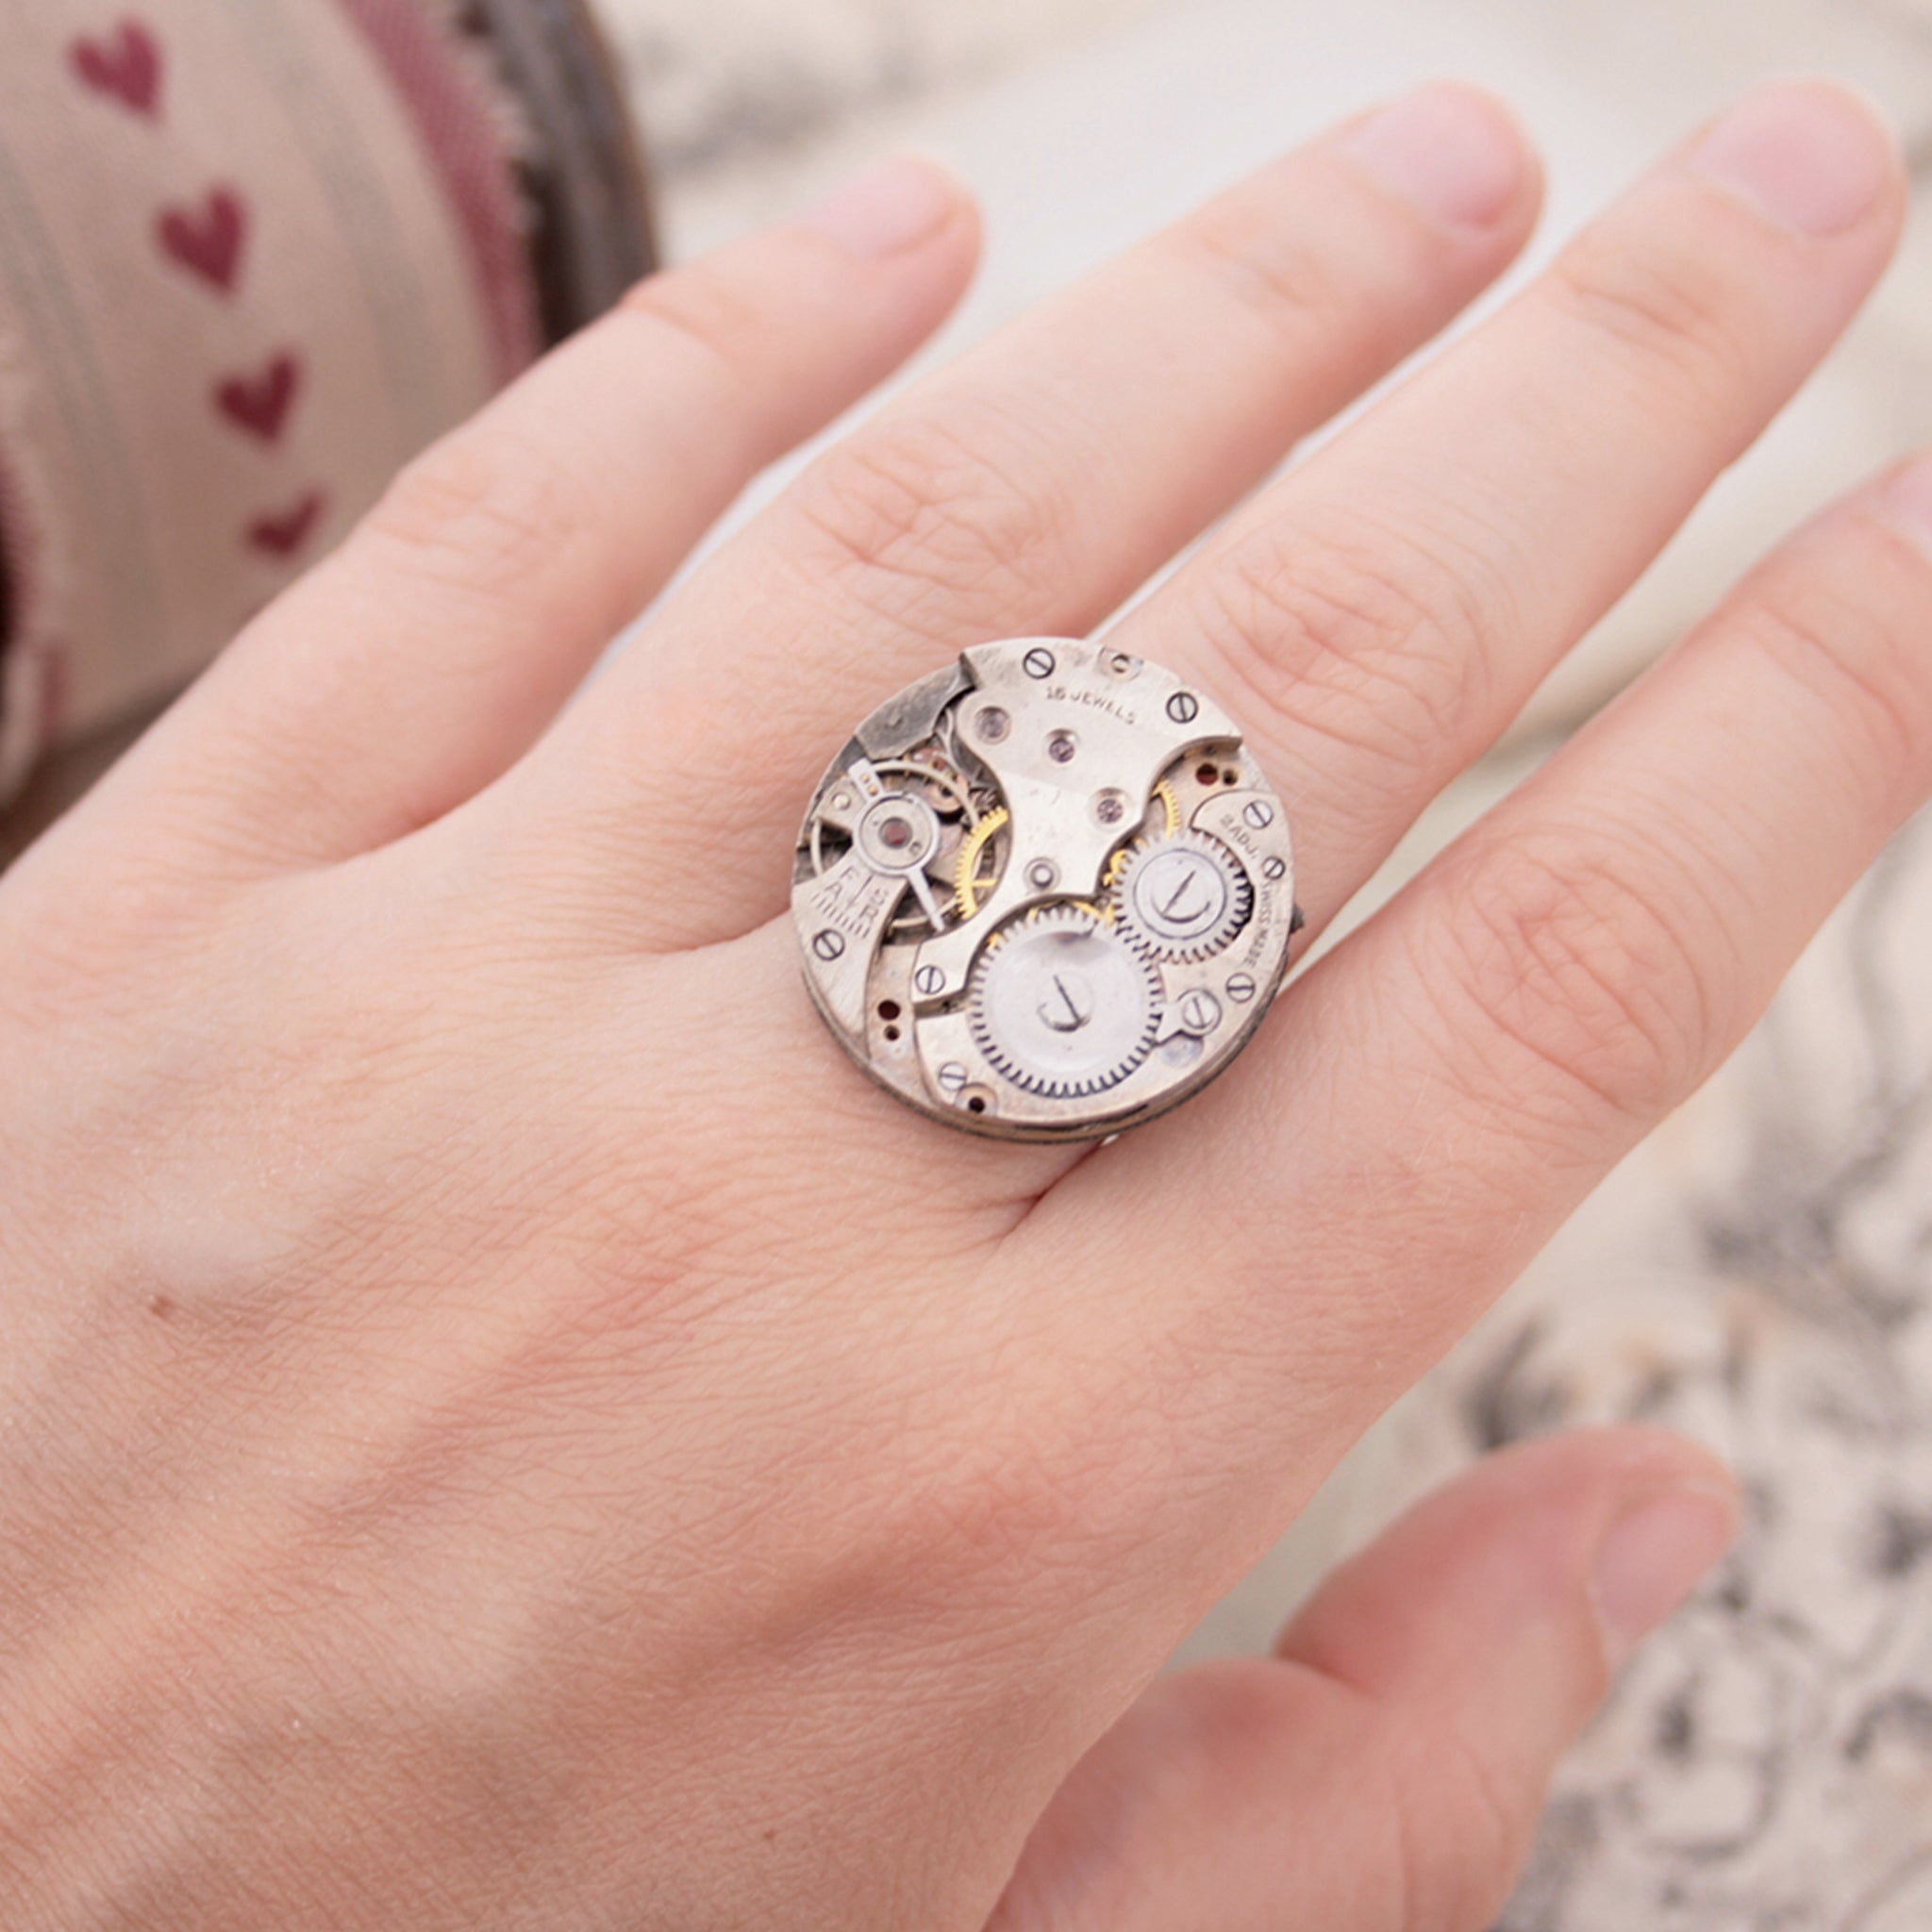 Gothic Ring with Watch Movement on a Hand